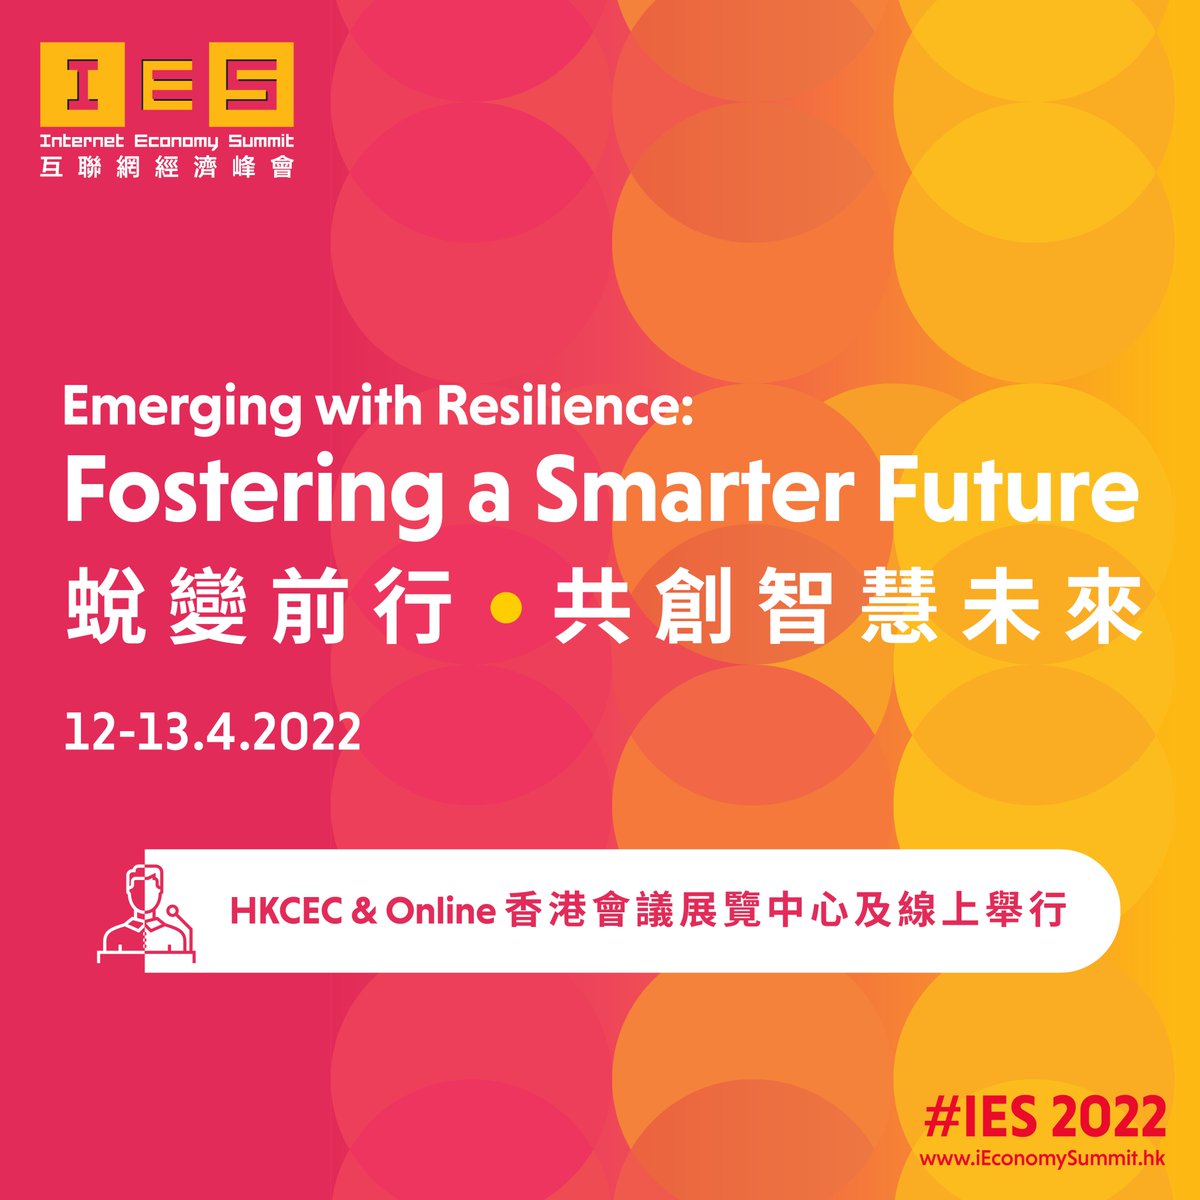 #IES2022 (12-13 Apr) is set to explore global and regional visions on how #smartcity #technology will supercharge smart economies as well as accelerate the formation of futureproof digital societies. Grab early bird rate + buy 2 get 1 FREE special NOW: bit.ly/3skA3hU